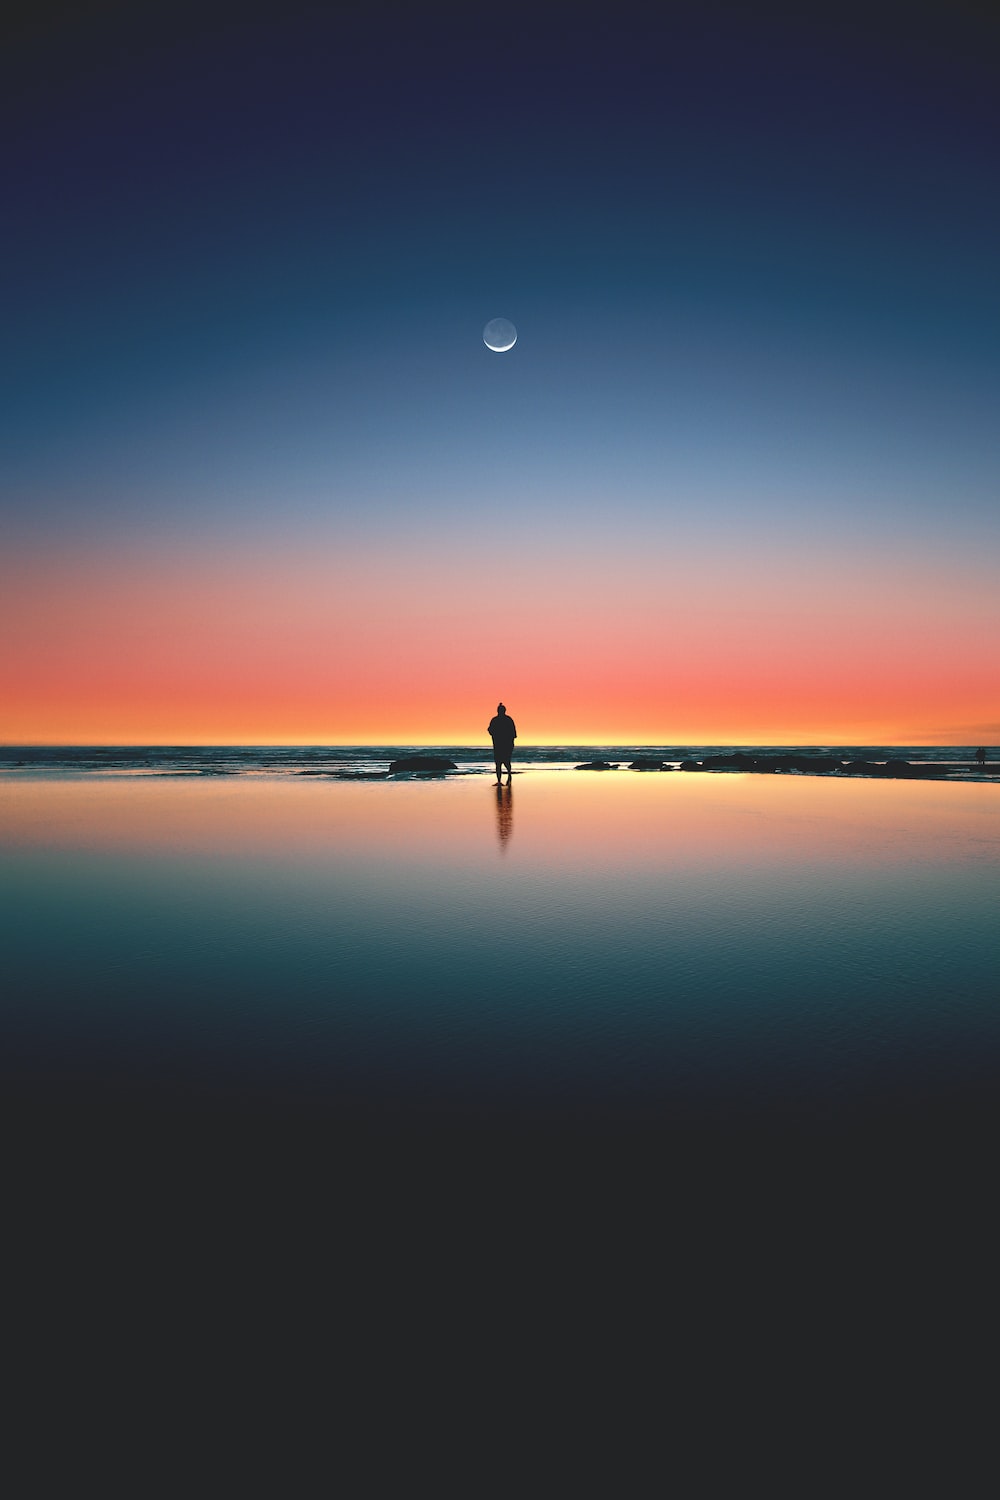 Sunset Alone Picture. Download Free Image